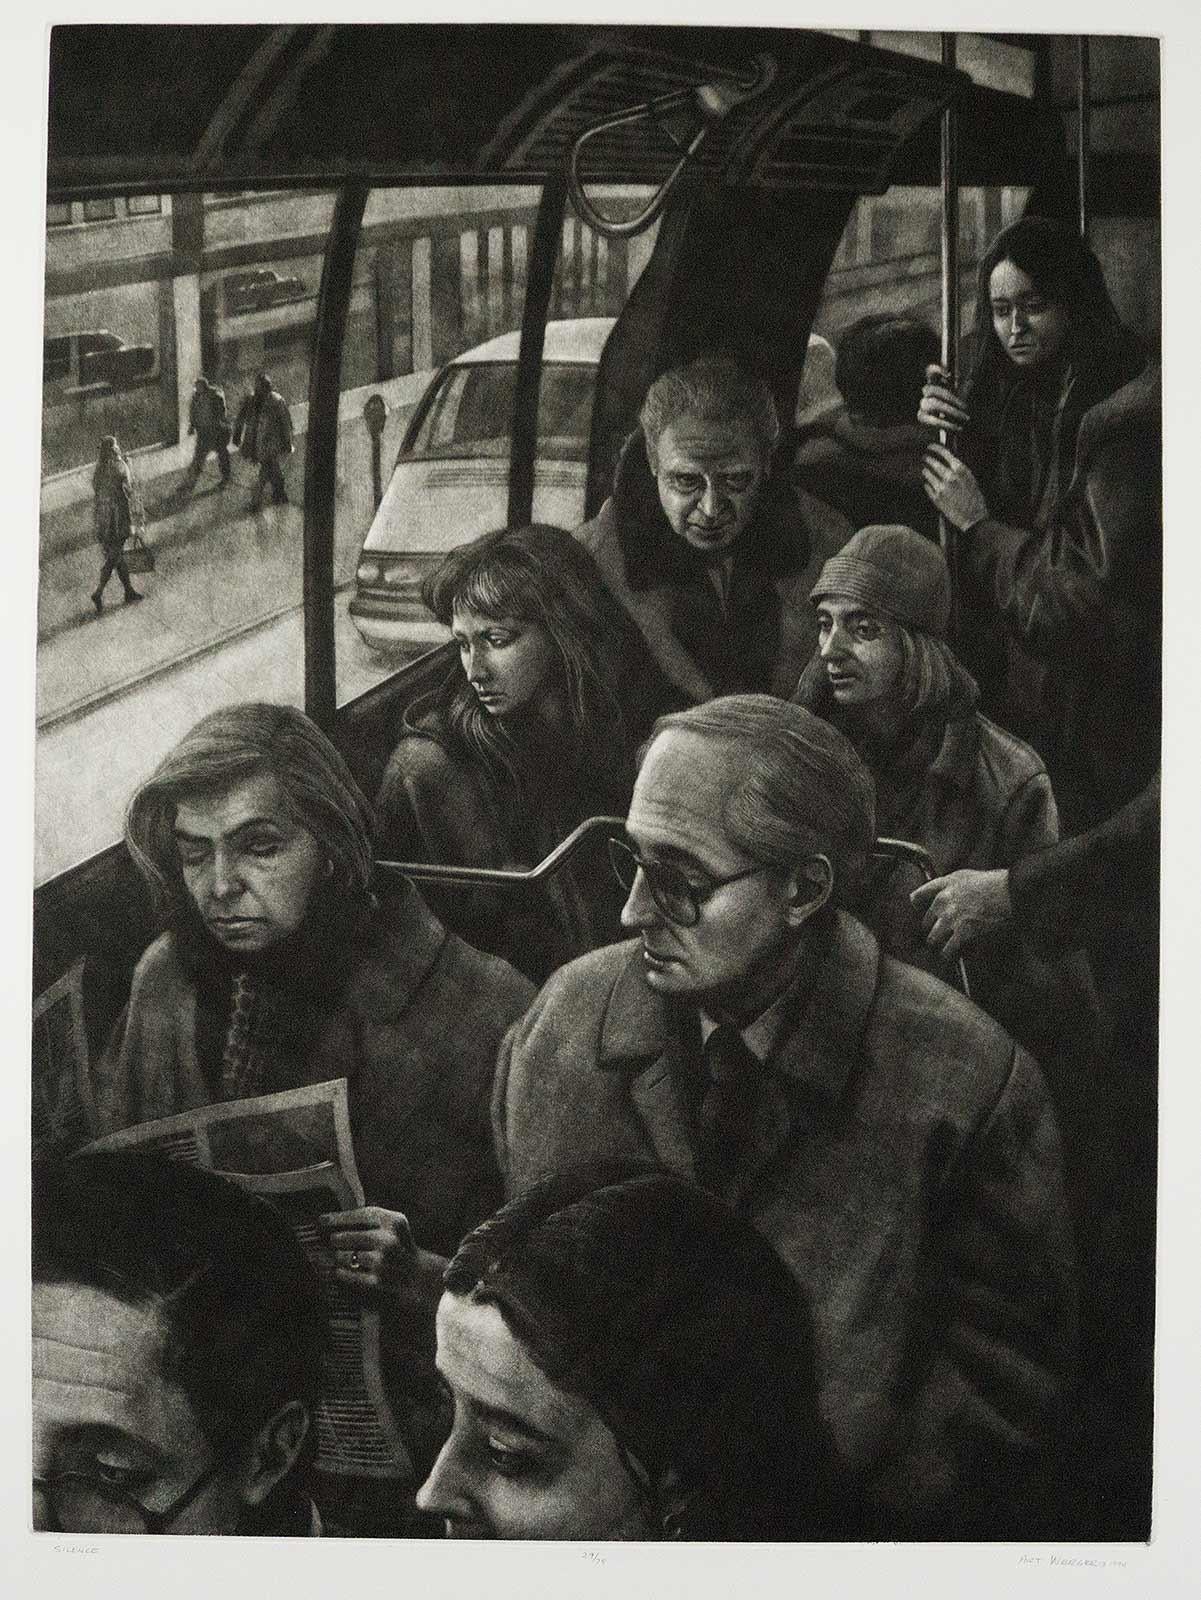 Silence shows commuters riding on a city bus, some reading and some observing the passing life on the street. This  is printed in a limited edition of 75.  
Art Werger’s lyrical suburban scenes are evocative of boyhood summer evenings while his city